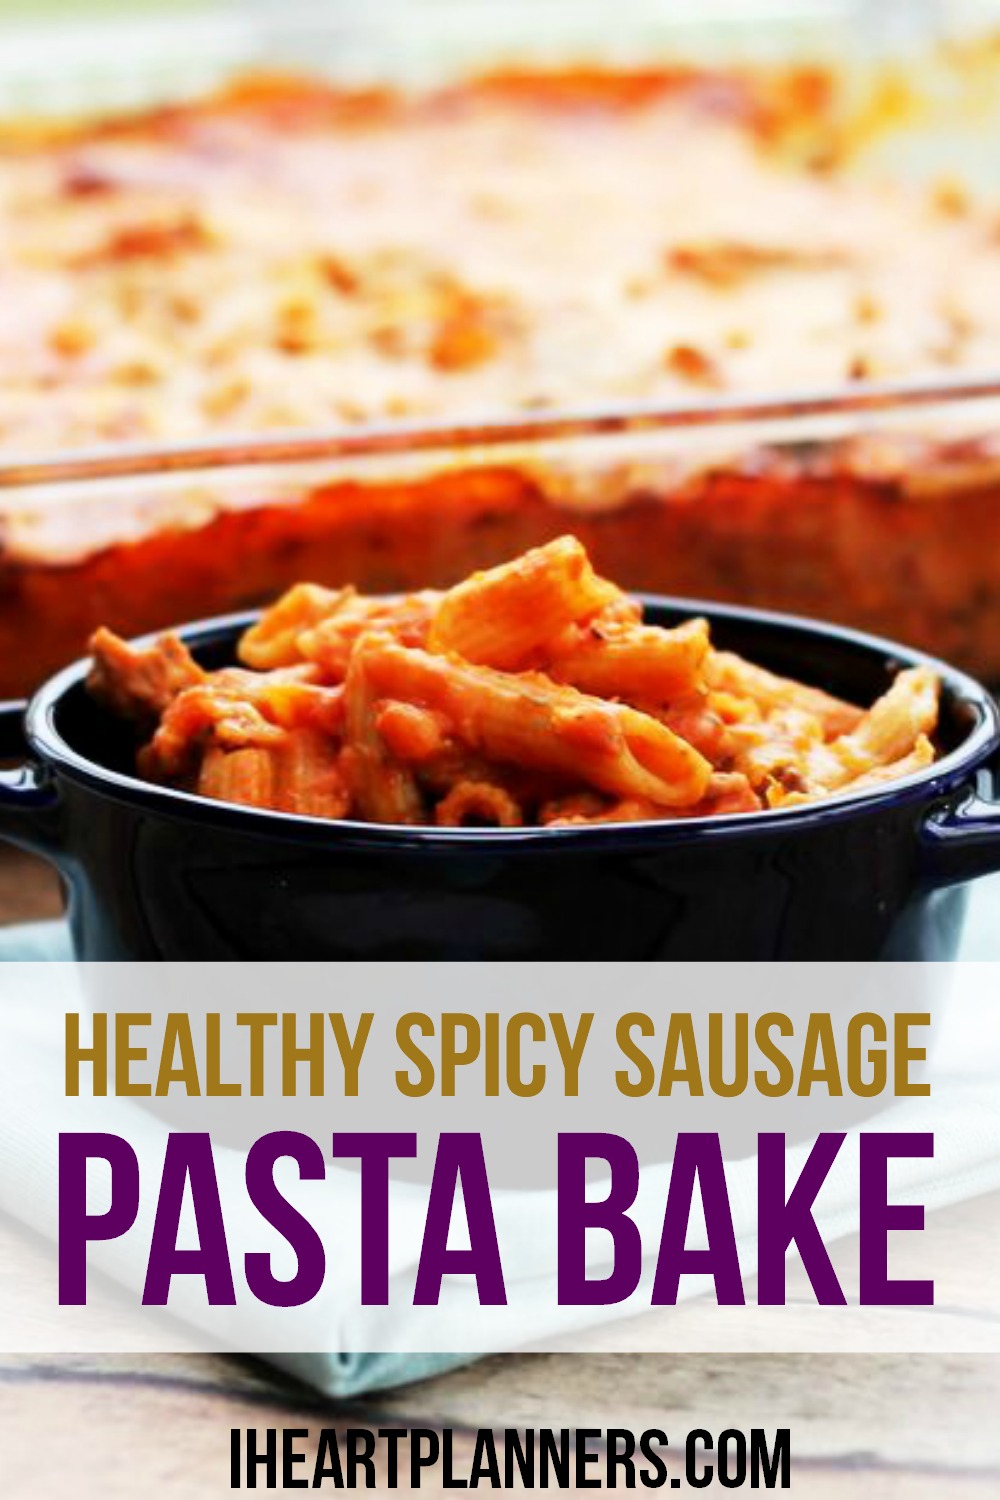 Quick, easy, and healthy spicy sausage pasta bake. Save time by using pre cooked turkey sausage crumbles and not boiling the noodles before baking. Tasty and easy to make!